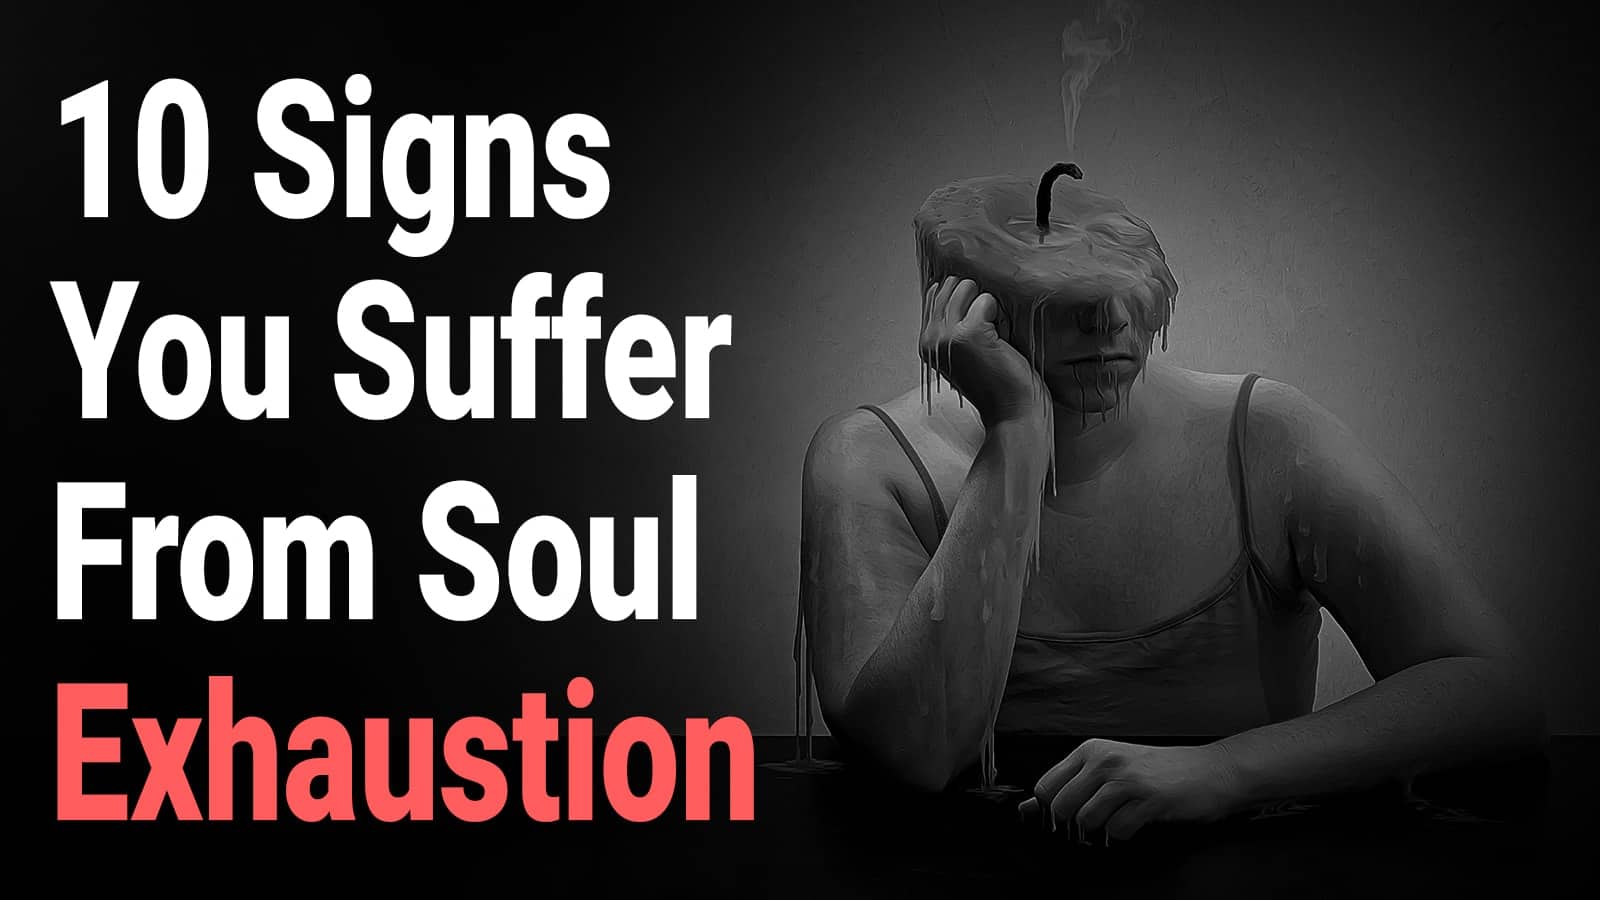 10 Signs You Suffer From Soul Exhaustion